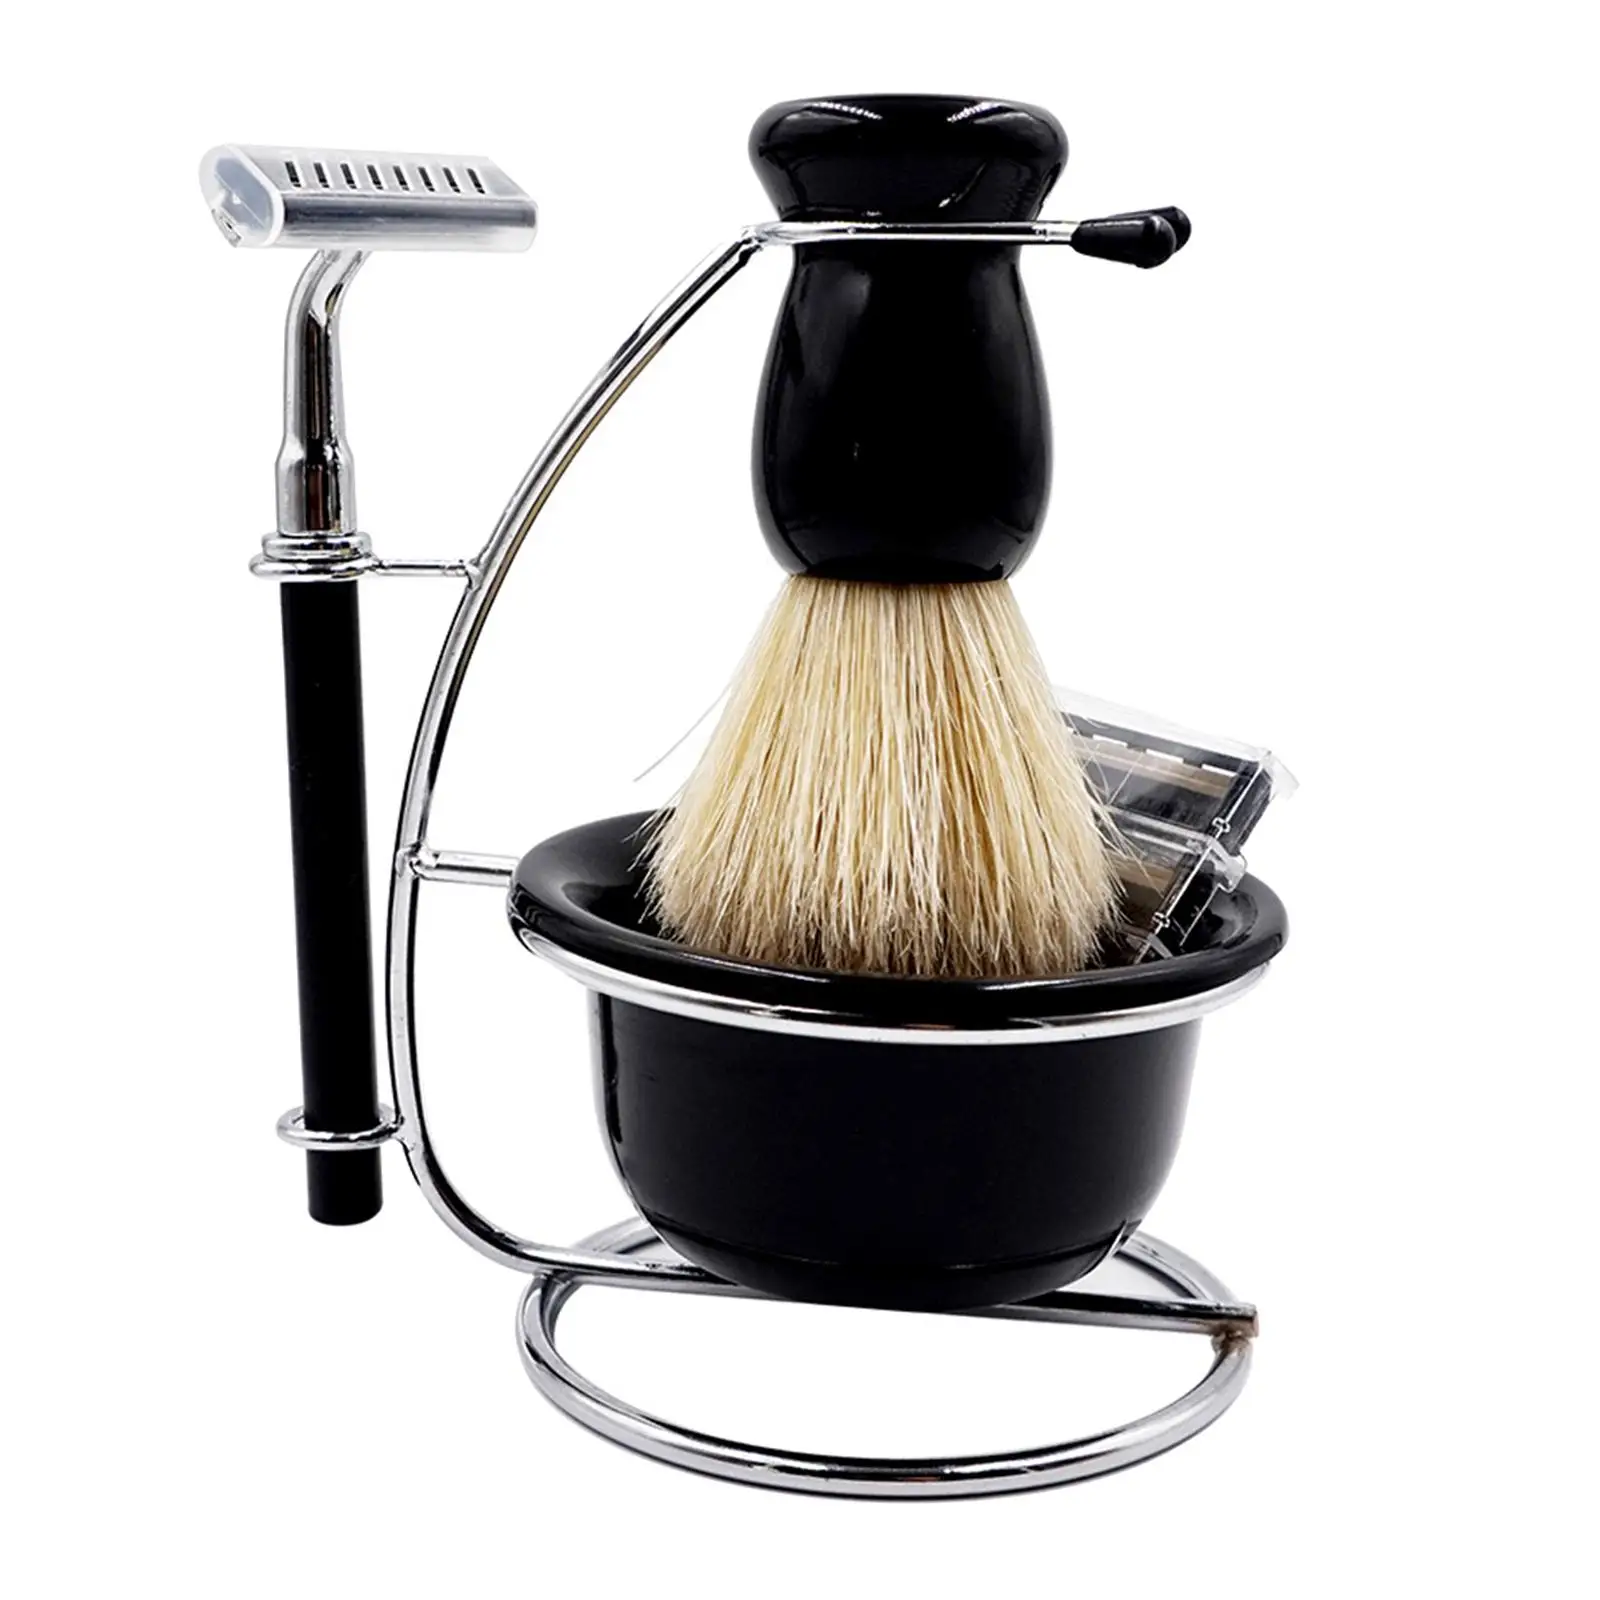 Men Shaving Set Manual Stand Brush Bowl Set Accessories Durable Weighted Bottom Professional Stainess Steel Holder Solid